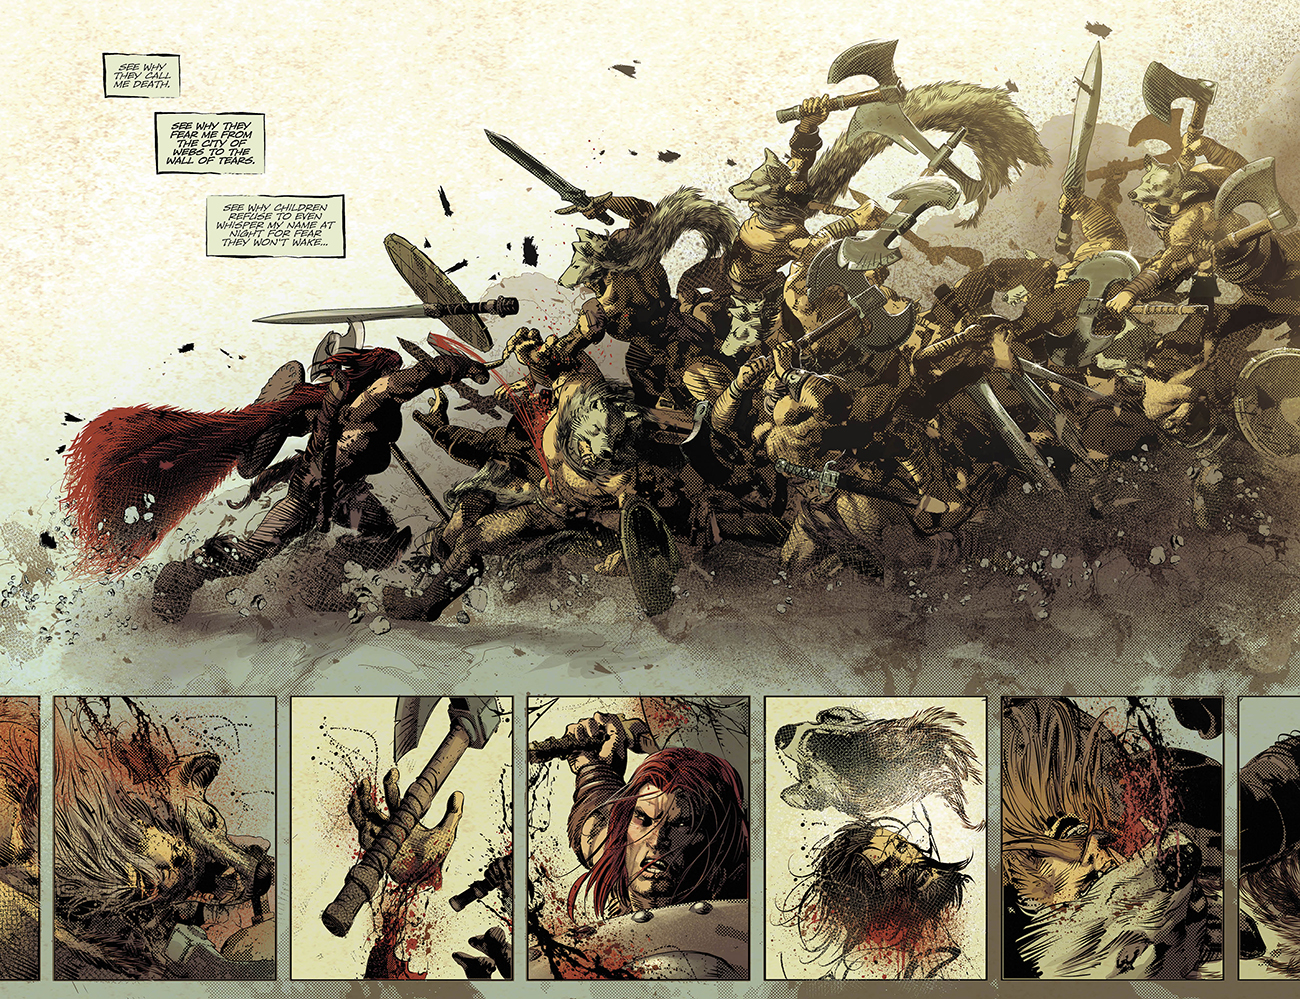 Berzerker Unbound by Jeff Lemire and Mike Deodato